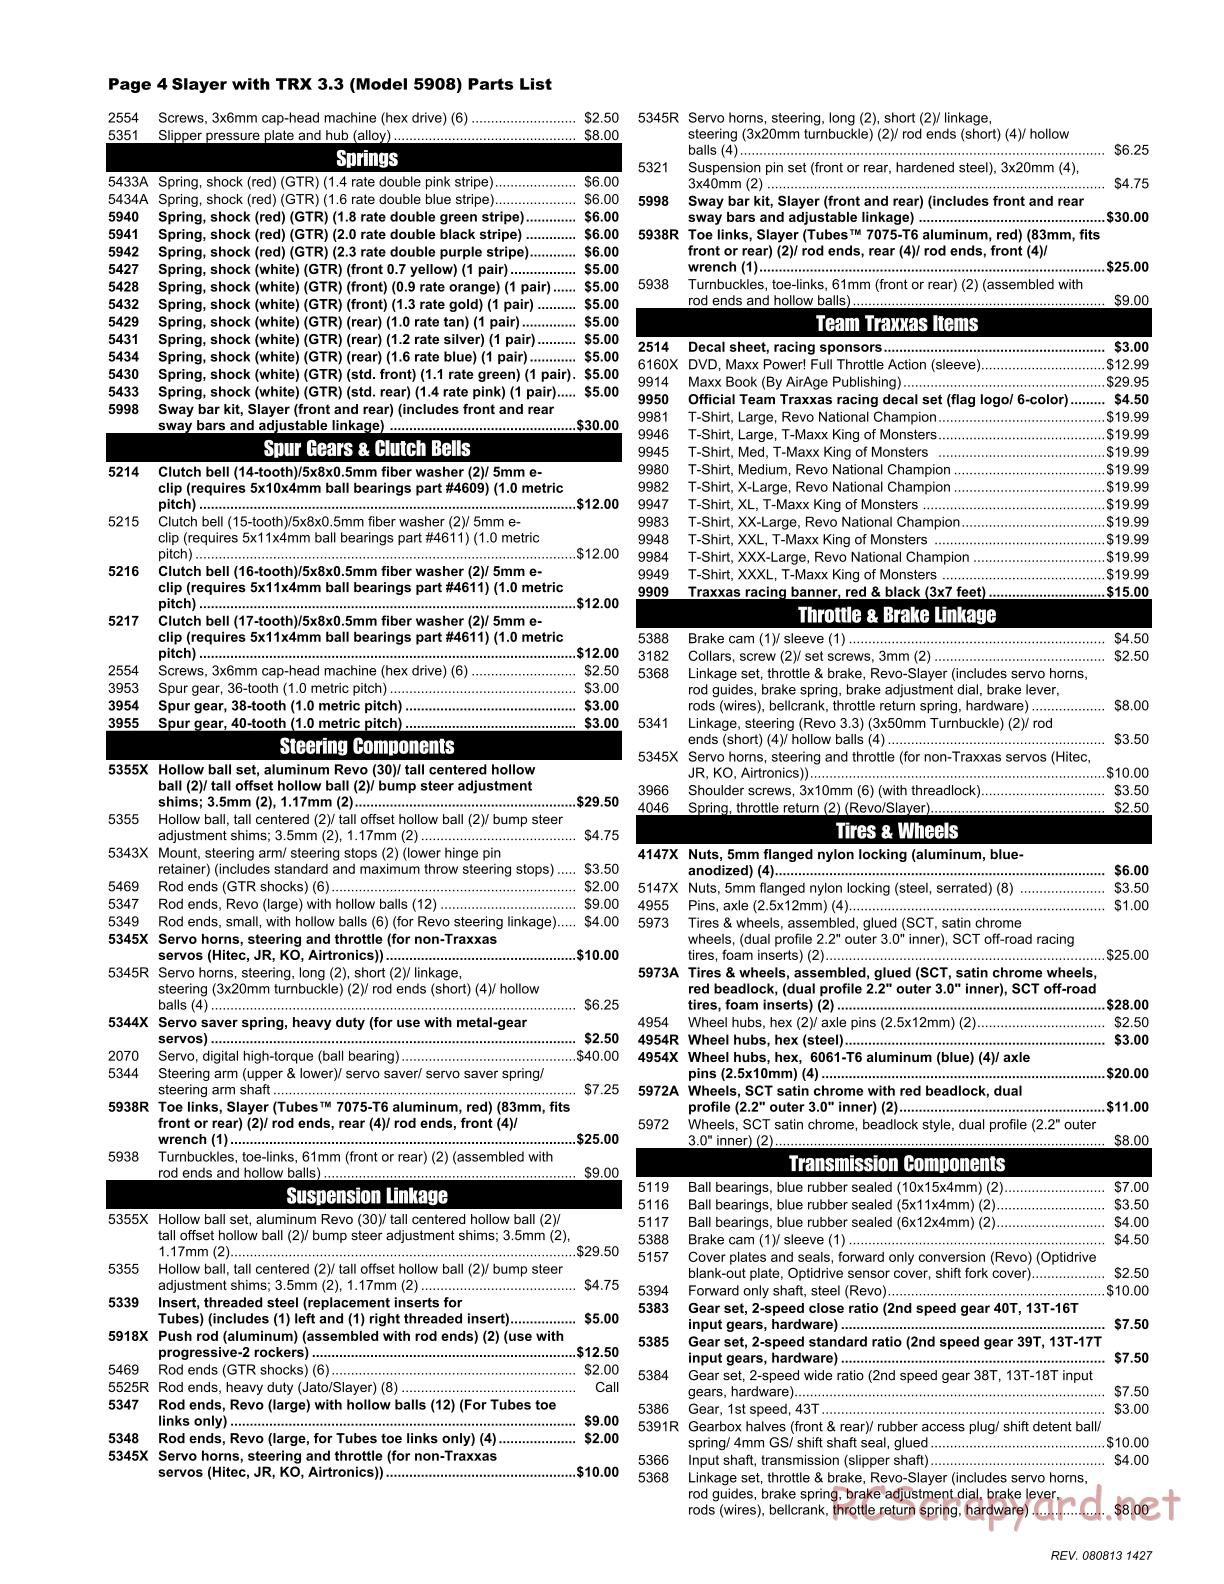 Traxxas - Slayer Pro 4WD (2008) - Parts List - Page 4